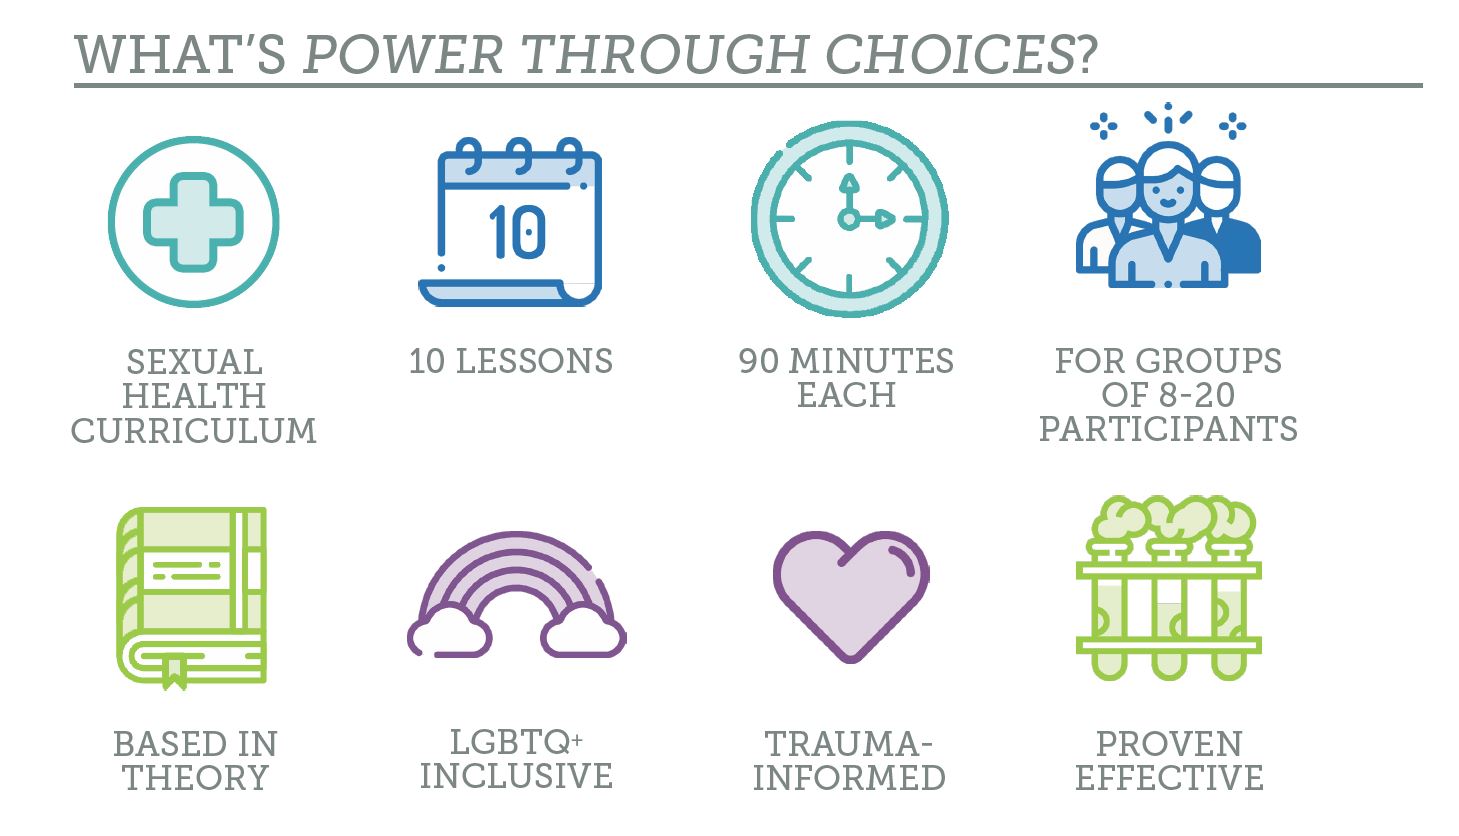 Image with icons identifying key elements of Power Through Choices: sexual health curriculum, 10 lessons, 90 minutes each, for groups of 8-20 participants, based in theory, LGBTQ+ inclusive, trauma-informed, proven effective